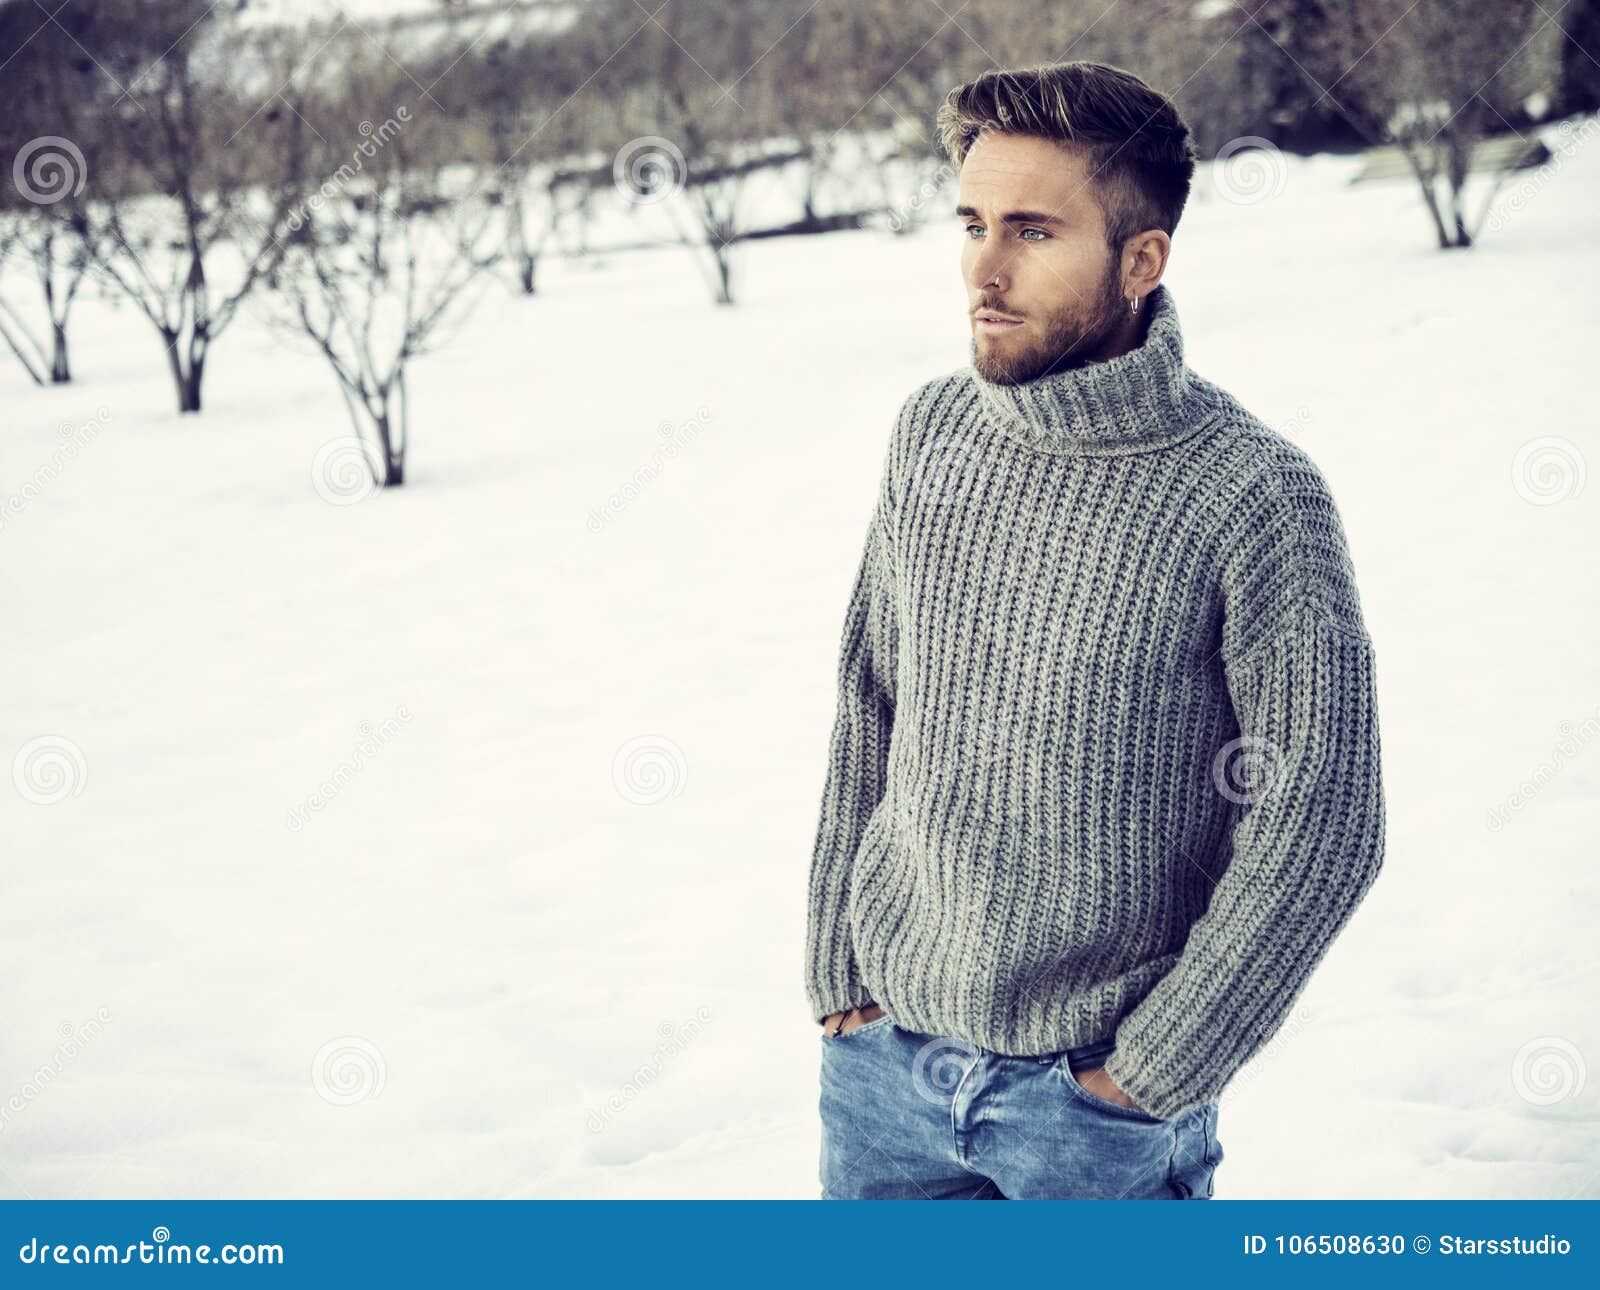 Handsome Young Man Outdoor in Winter Fashion Stock Photo - Image of ...